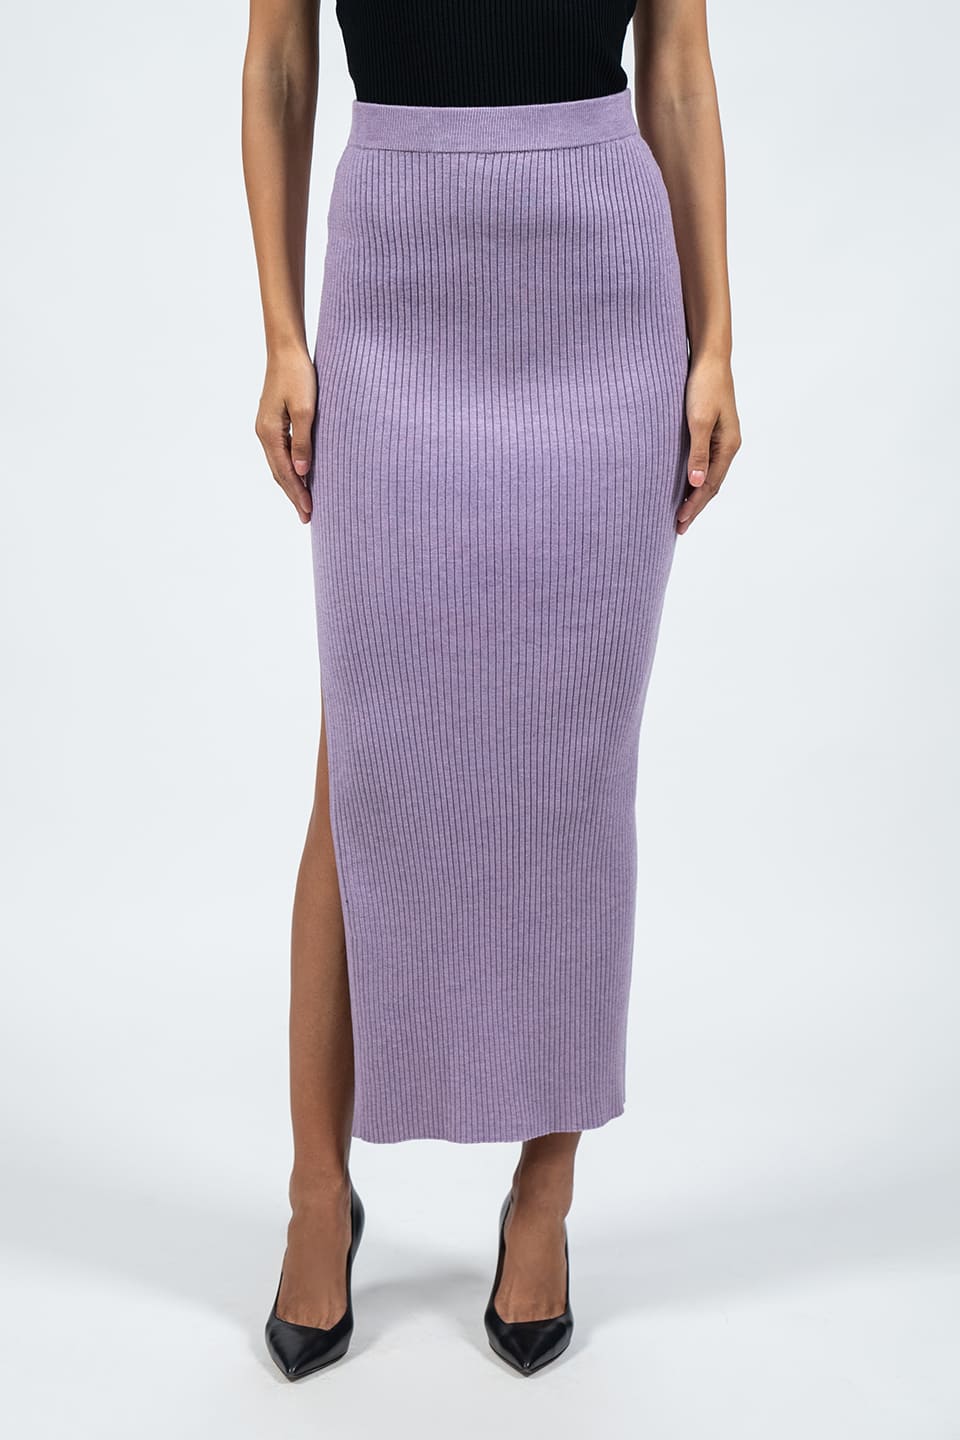 Shop online trendy Violet Skirts from Dodo Bar Or Fashion designer. Product gallery 1